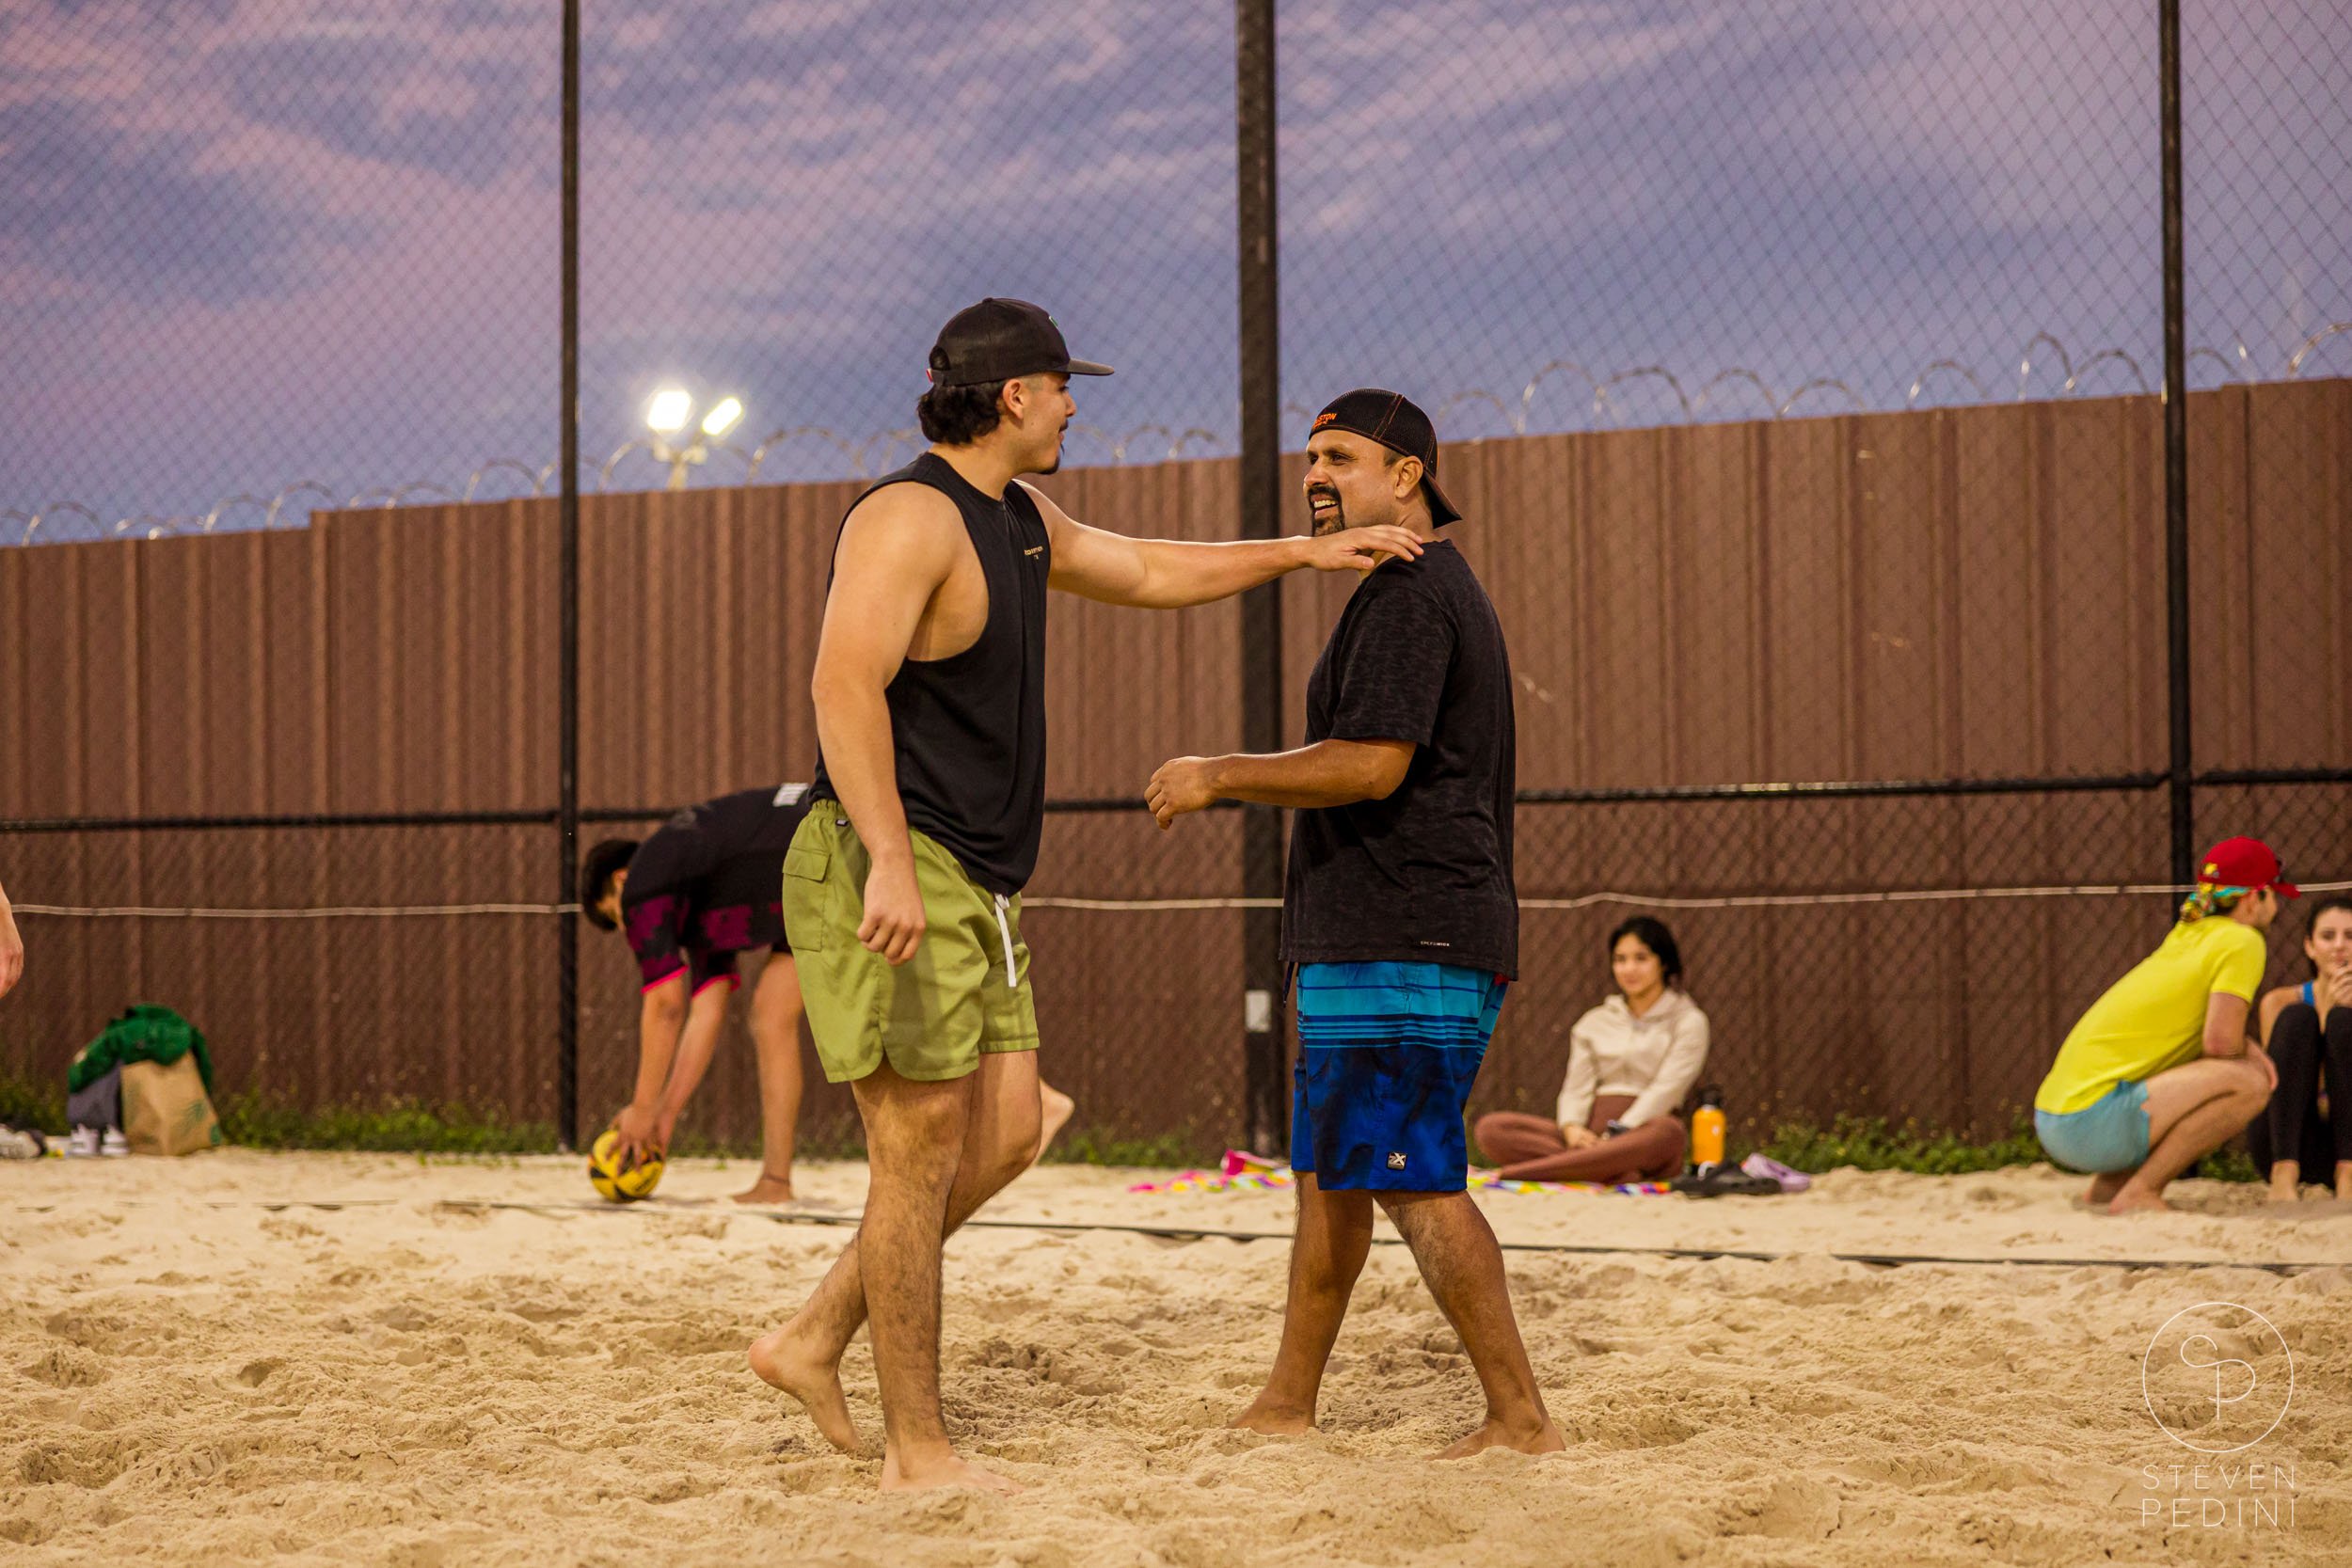 Steven Pedini Photography - Bumpy Pickle - Sand Volleyball - Houston TX - World Cup of Volleyball - 00294.jpg